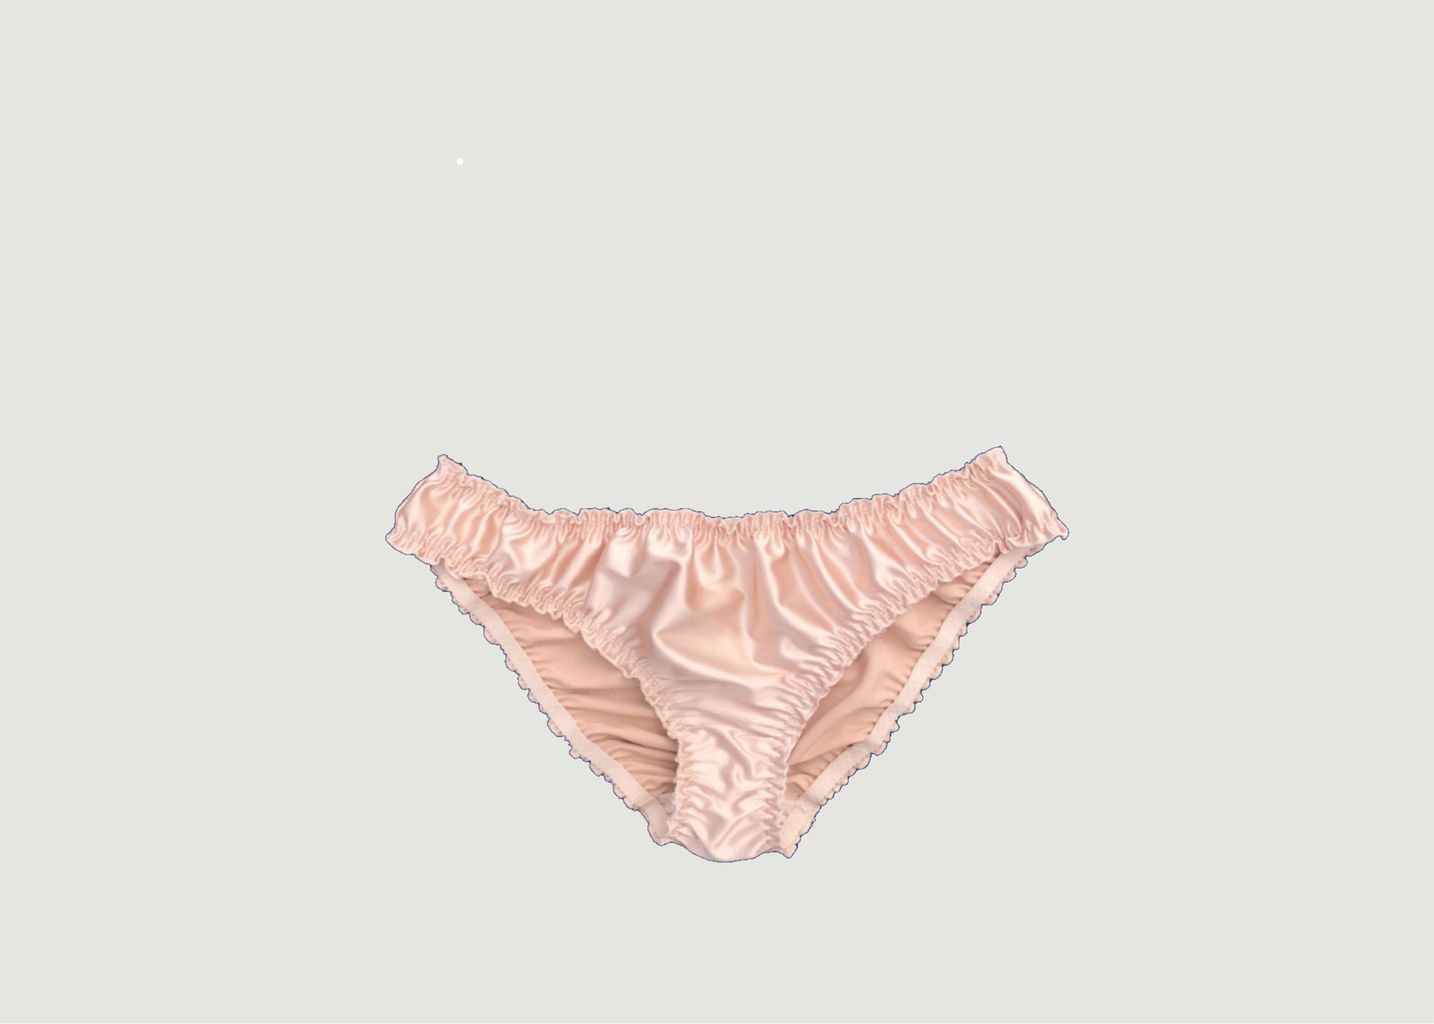 Baby panties in recycled polyester satin - La chatte de Françoise